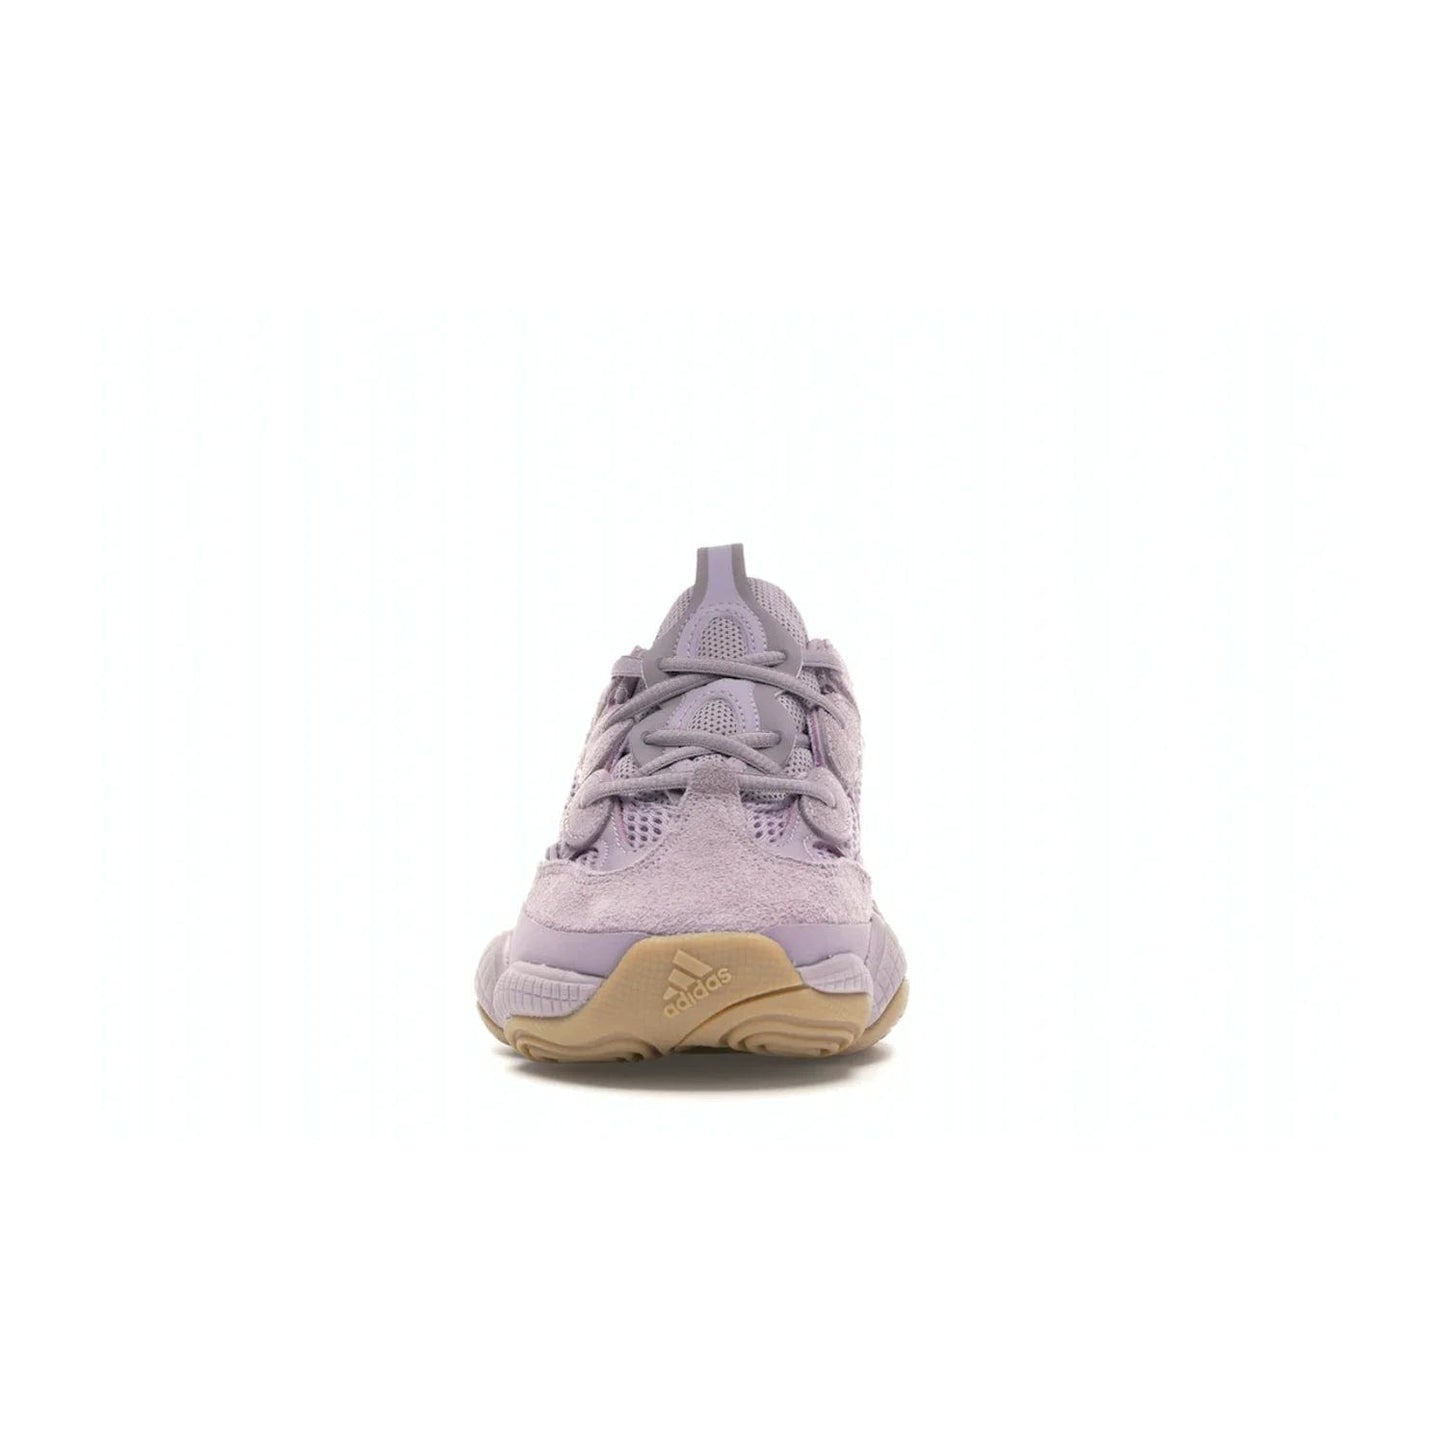 adidas Yeezy 500 Soft Vision - Image 10 - Only at www.BallersClubKickz.com - New adidas Yeezy 500 Soft Vision sneaker featuring a combination of mesh, leather, and suede in a classic Soft Vision colorway. Gum rubber outsole ensures durability and traction. An everyday sneaker that stands out from the crowd.